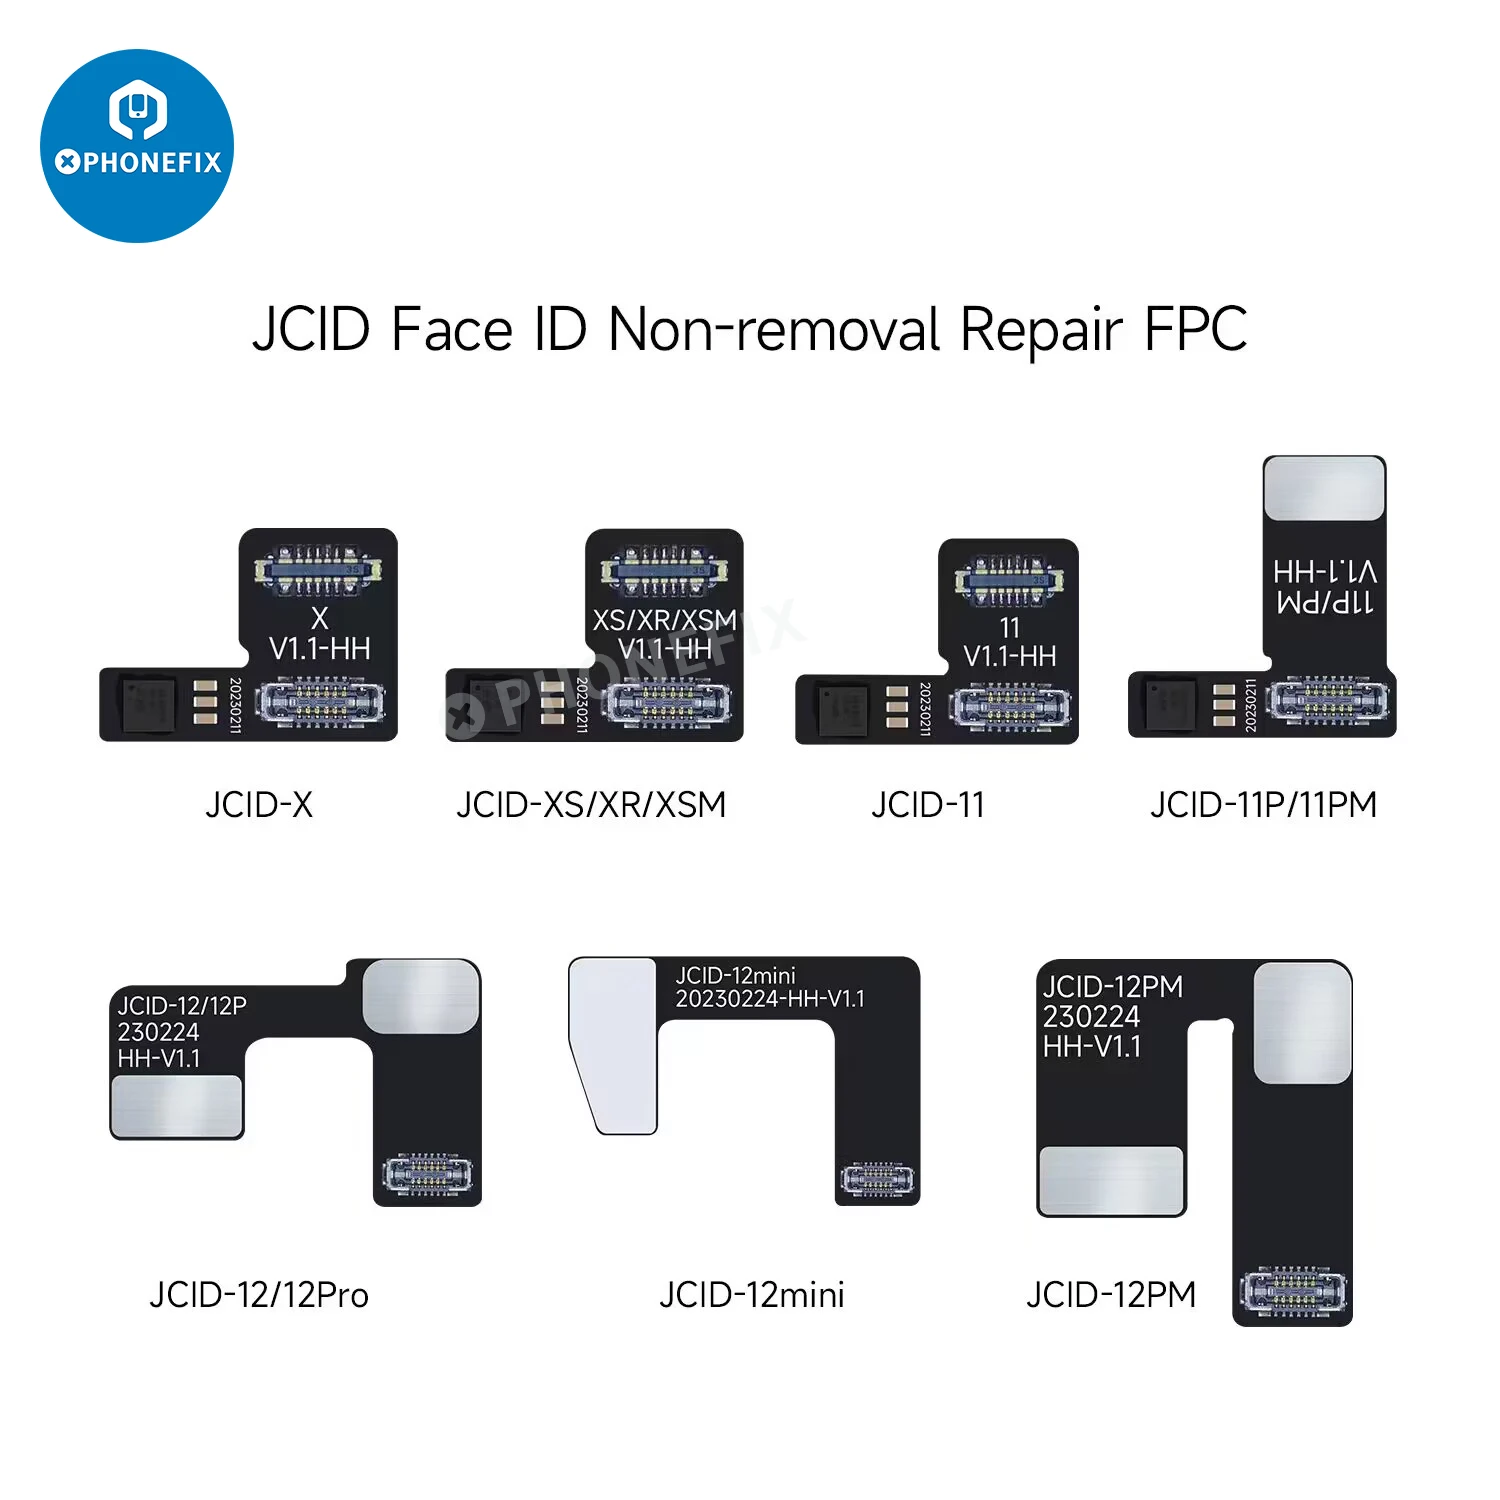 JCID JC Non-removal Face ID Repair FPC Flex Cable for iPhone X-14 Pro Max Dot Projector Read Write Face ID Not Working Repair